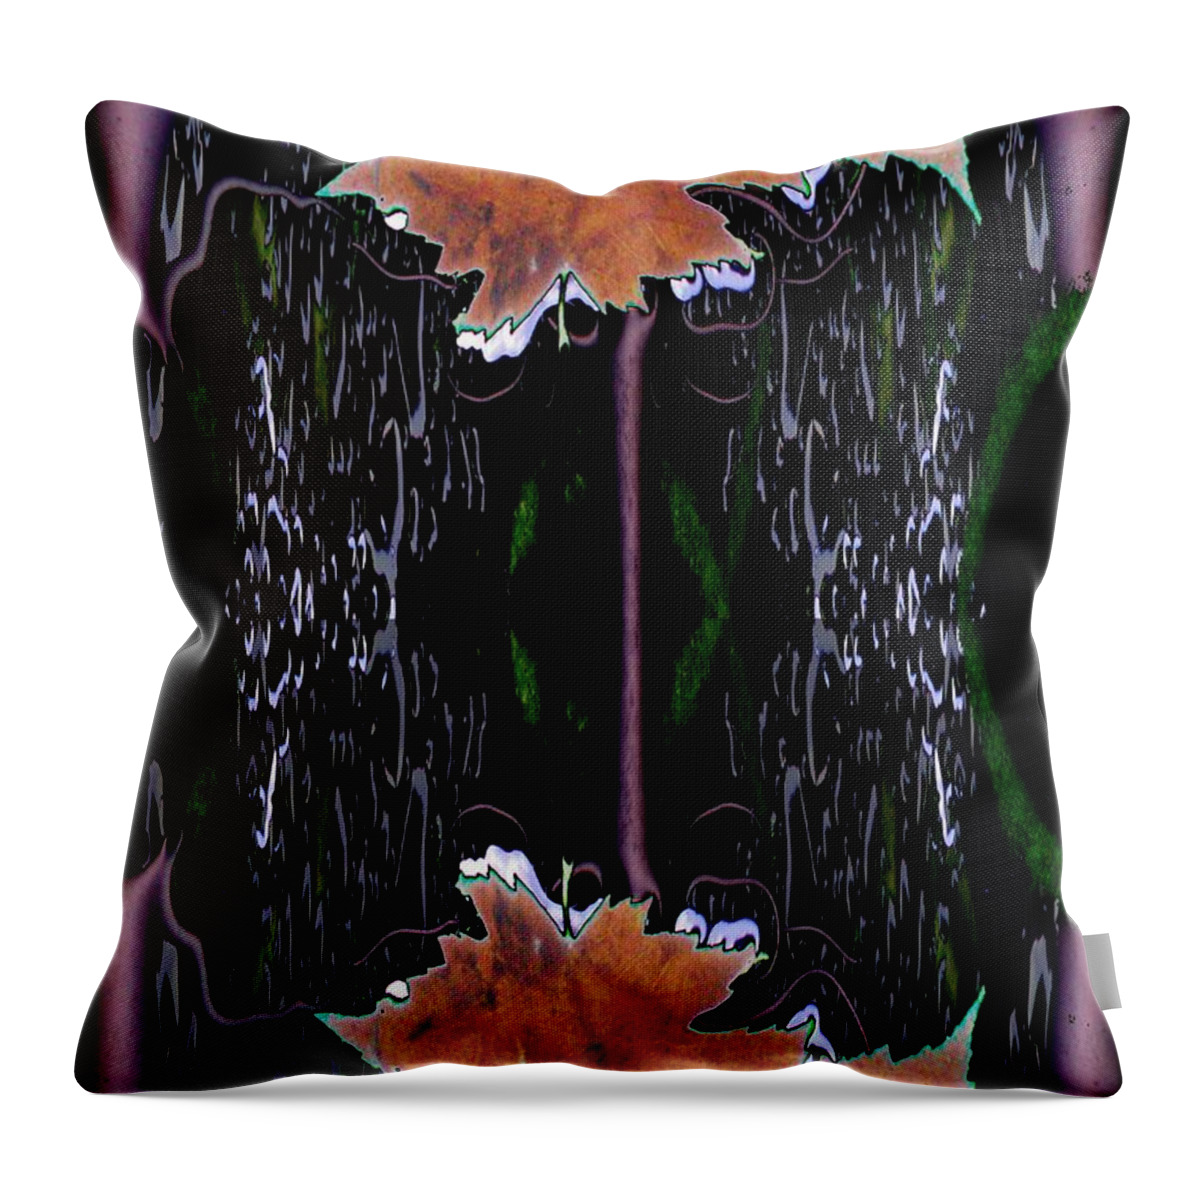 Leaf Throw Pillow featuring the photograph Leaf Melding by Tim Allen